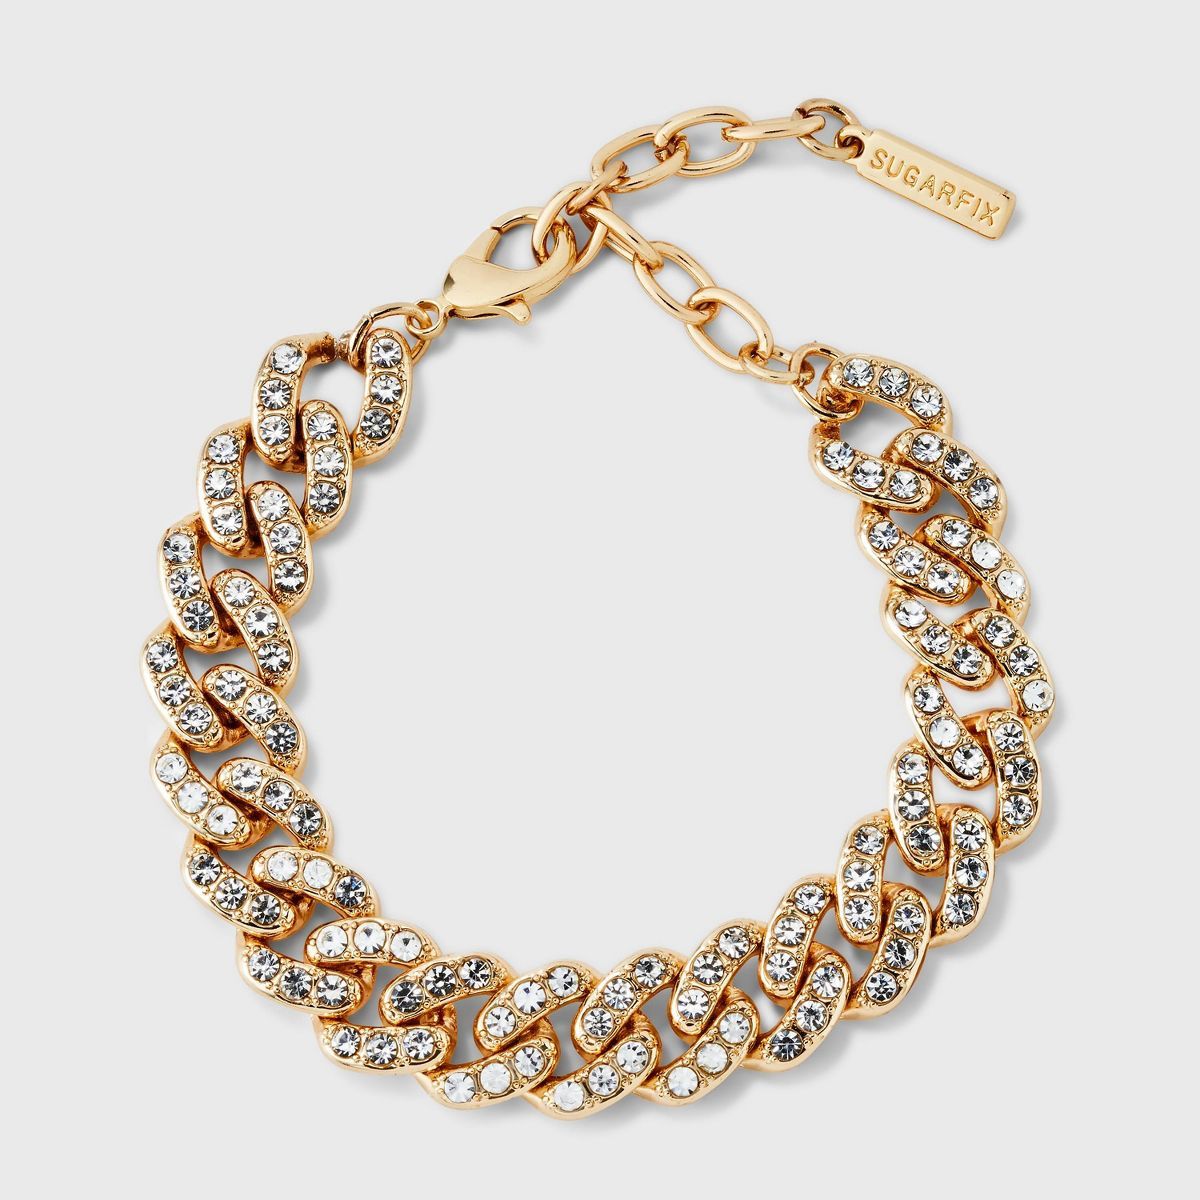 SUGARFIX by BaubleBar Gold and Crystal Curb Chain Bracelet - Gold | Target